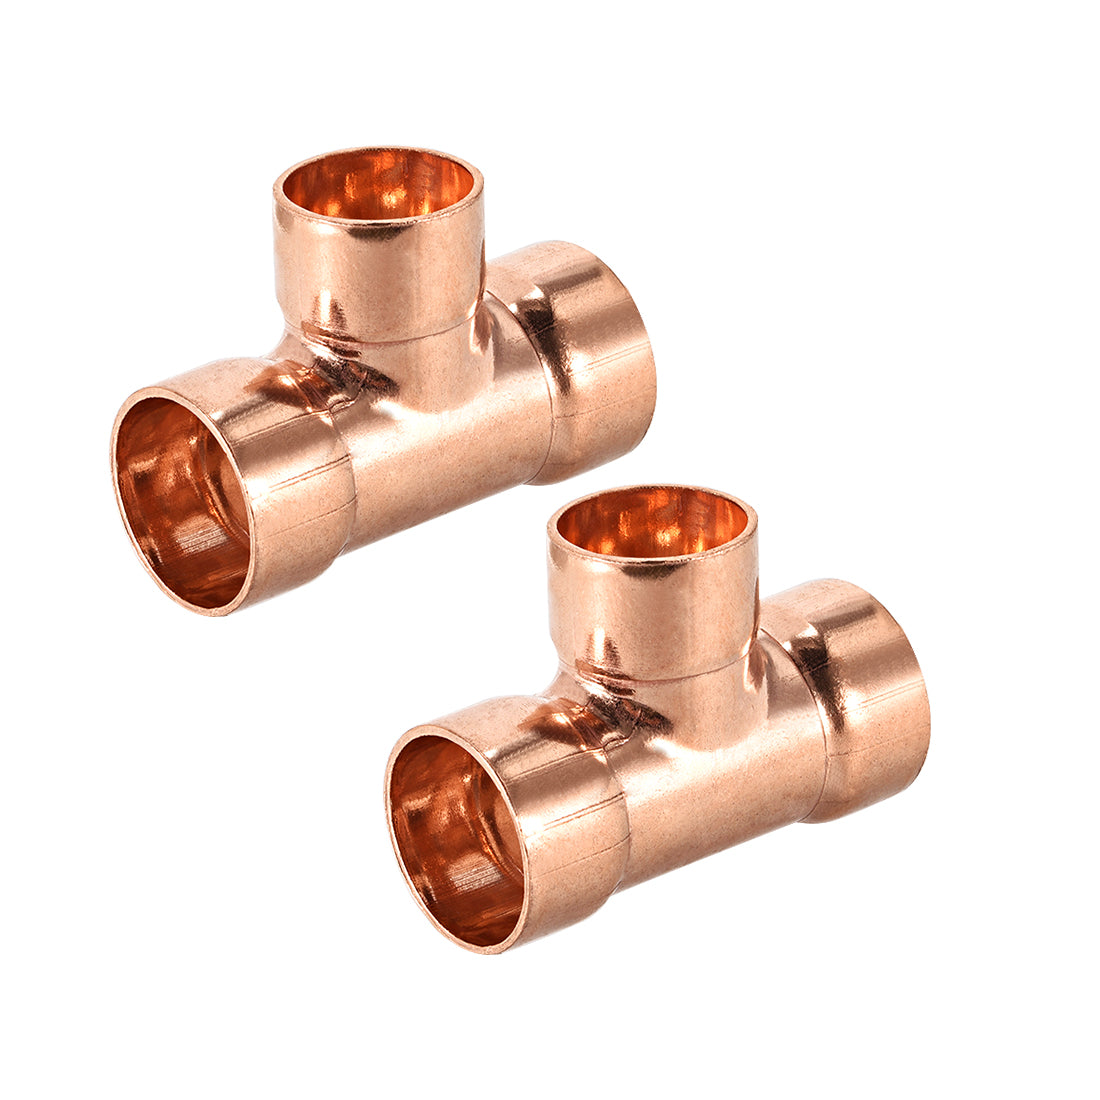 uxcell Uxcell 7/8-inch x 3/4-inch x 7/8-inch Copper Reducing Tee Copper Pressure Pipe Fitting Conector  for Plumbing Supply and Refrigeration 2pcs